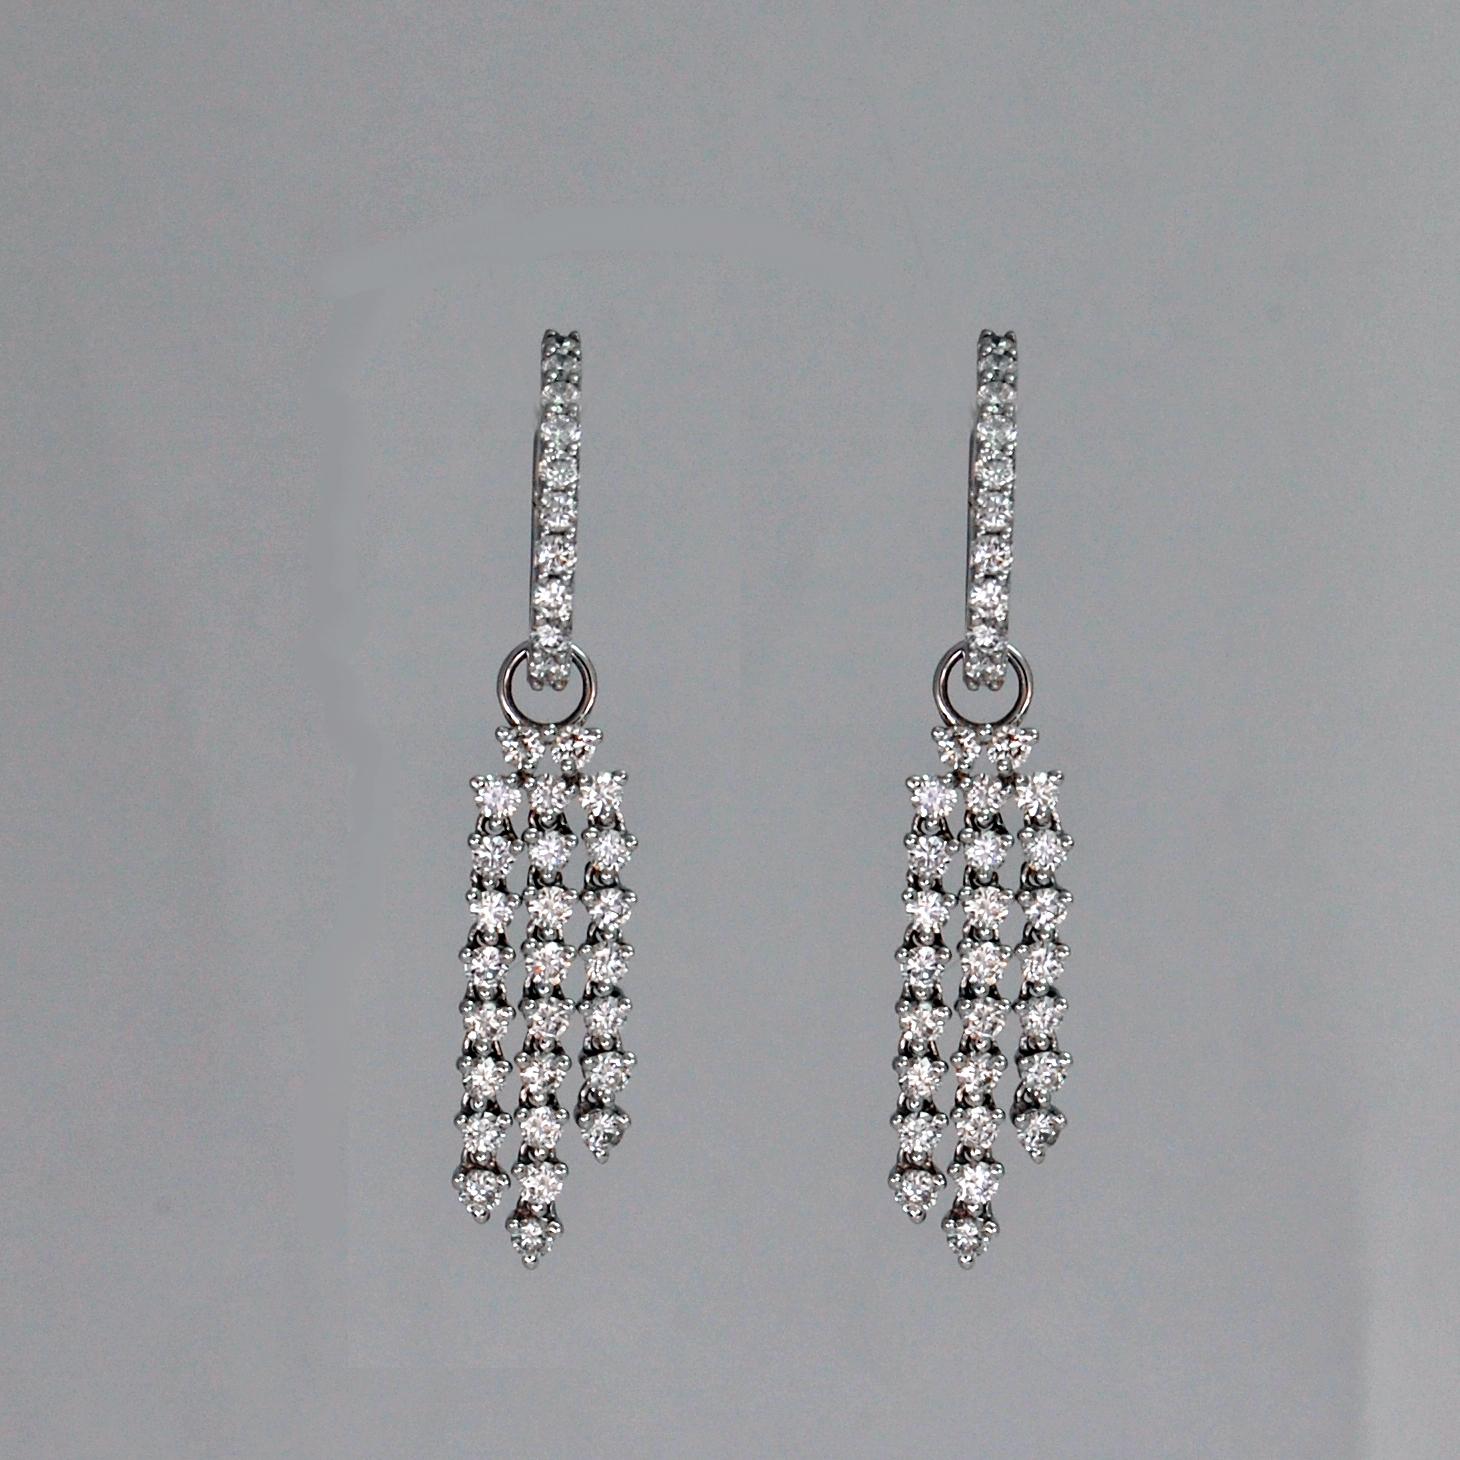 Beautiful diamond dangle drop earrings, chandelier / waterfall style, in 18 karat white gold created by Orostar. The drop parts easily come off and you can use them as huggie earrings. These charming women's earrings are available in stock.
* Metal: